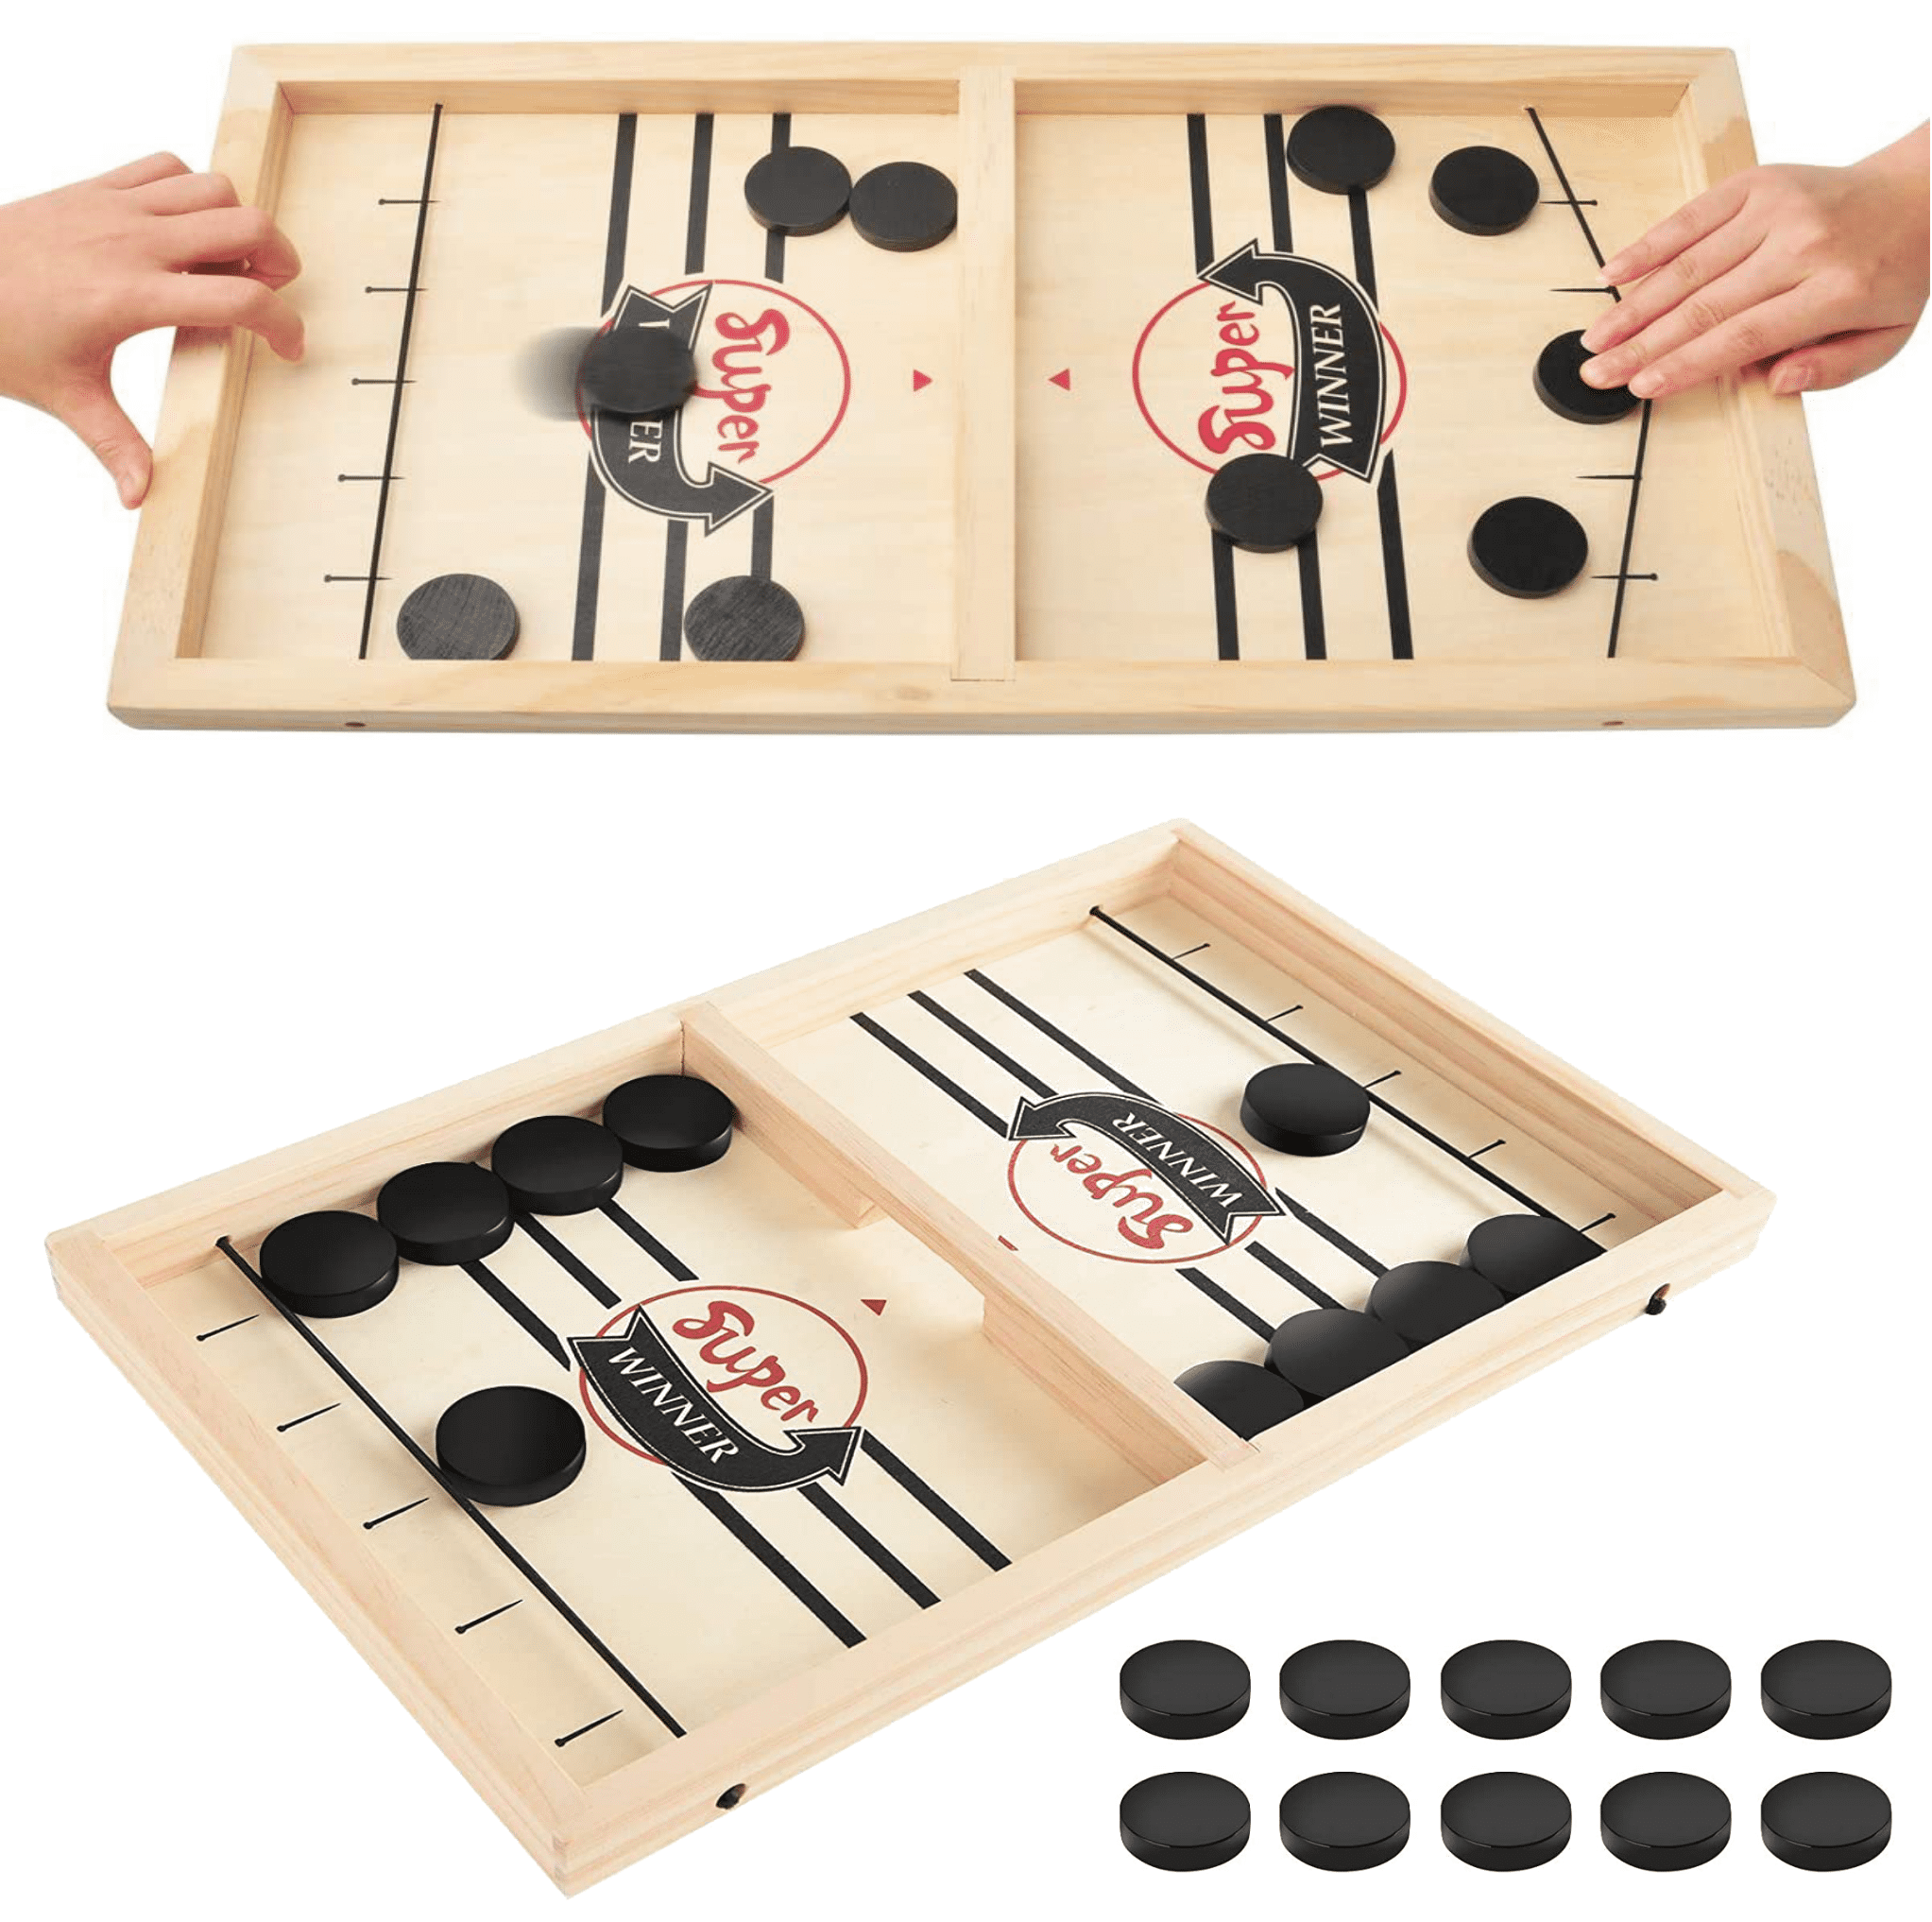 Sling Puck Game Paced SlingPuck Winner Board Family Games Toys Game Funny ki KY 